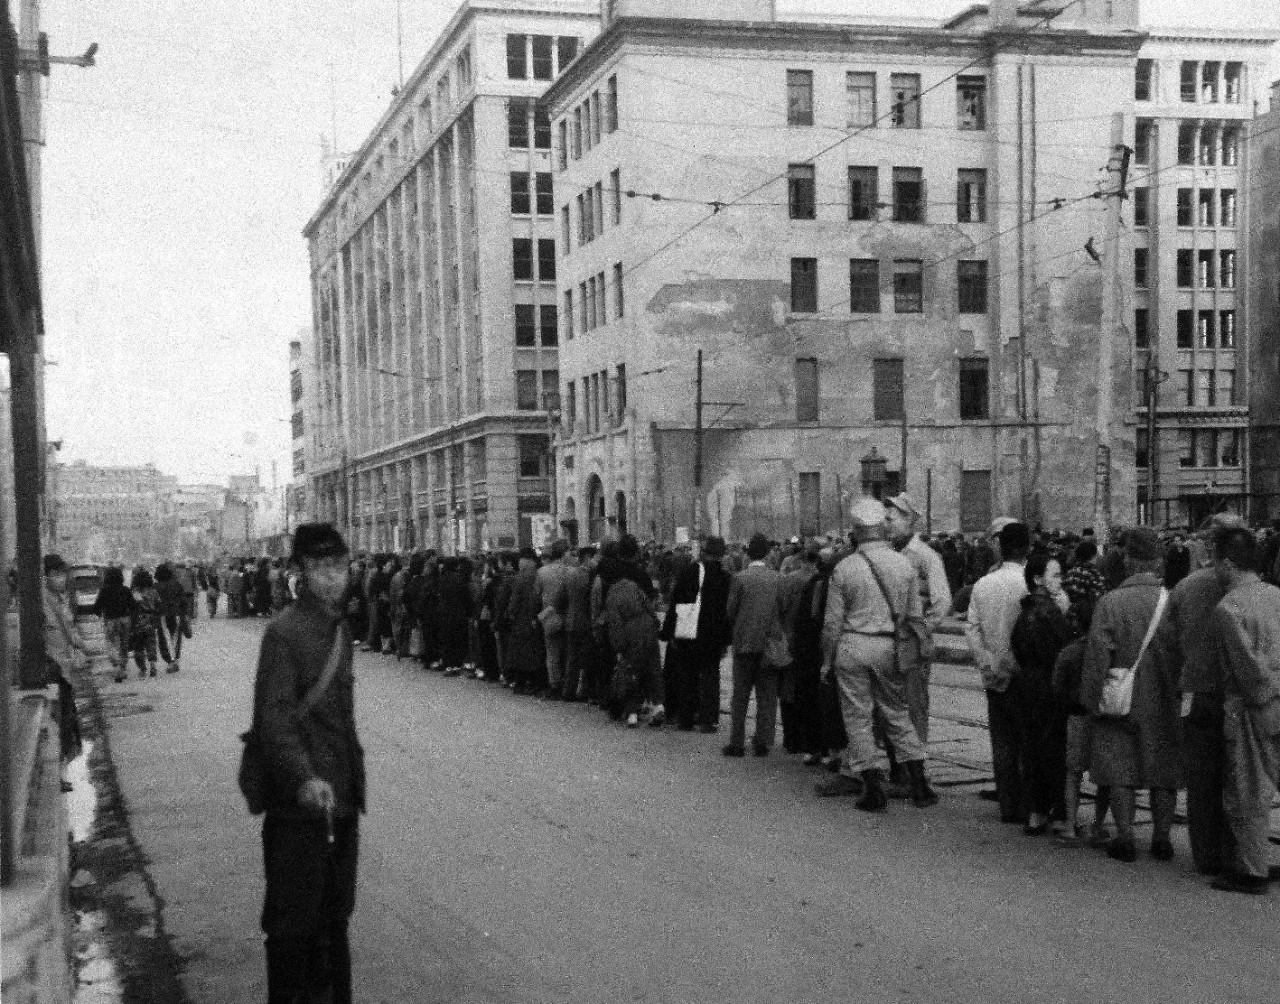 80-G-264851:   Occupation of Japan, 1945.    Scene at Sasebo, Kyushu, Japan, shows people lined up for trolley car on Ginza Street.  Photographed by crewmember of USS Chenango (CVE-28), released October 19, 1945.   Official U.S. Navy photograph, now in the collection of the National Archives.  (2015/12/01).